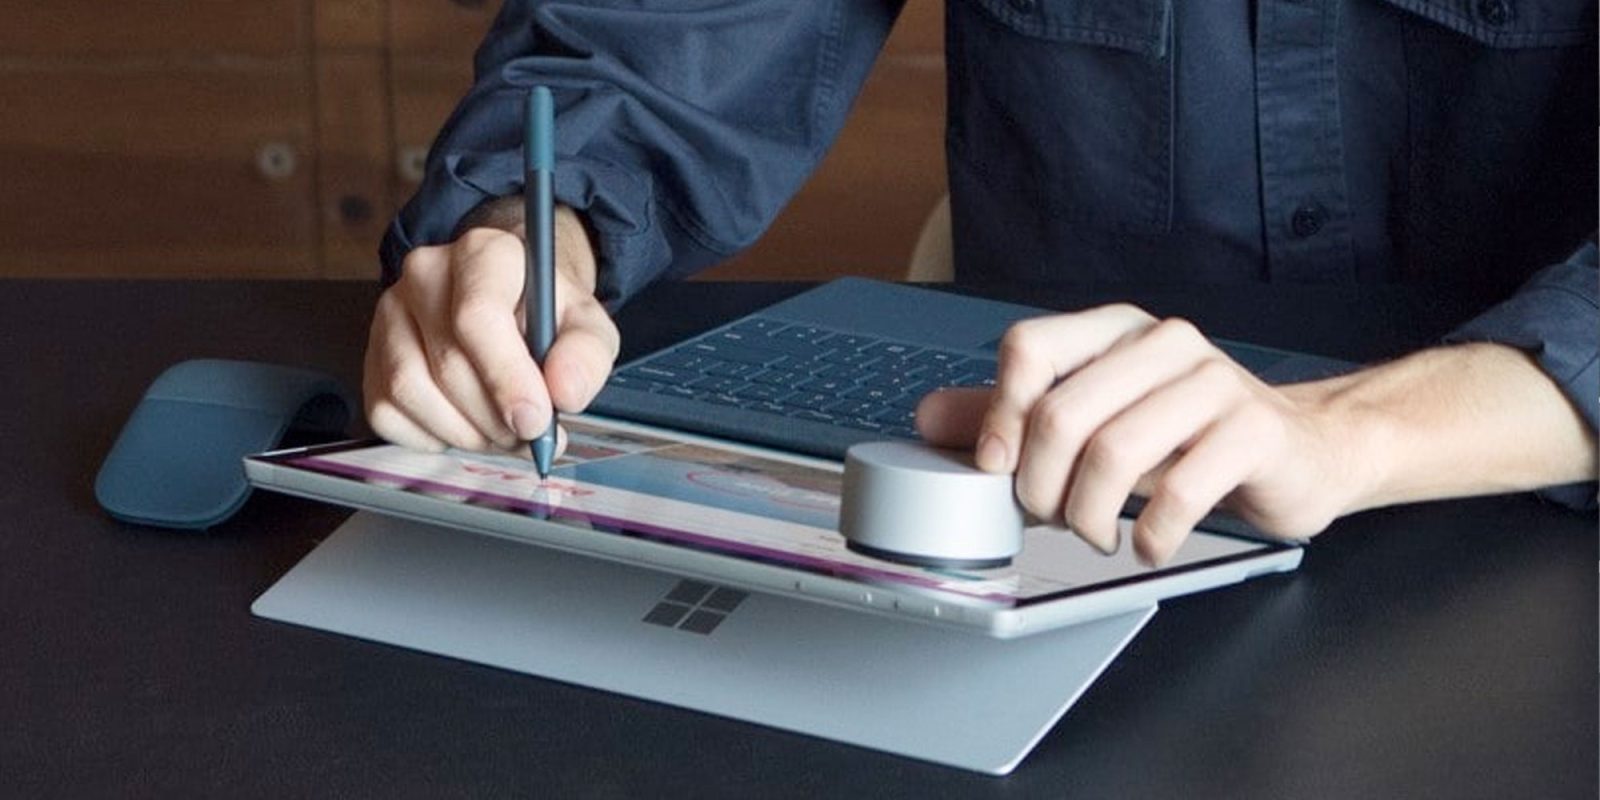 Microsoft's Surface Pen has never been less at Amazon: $72 shipped